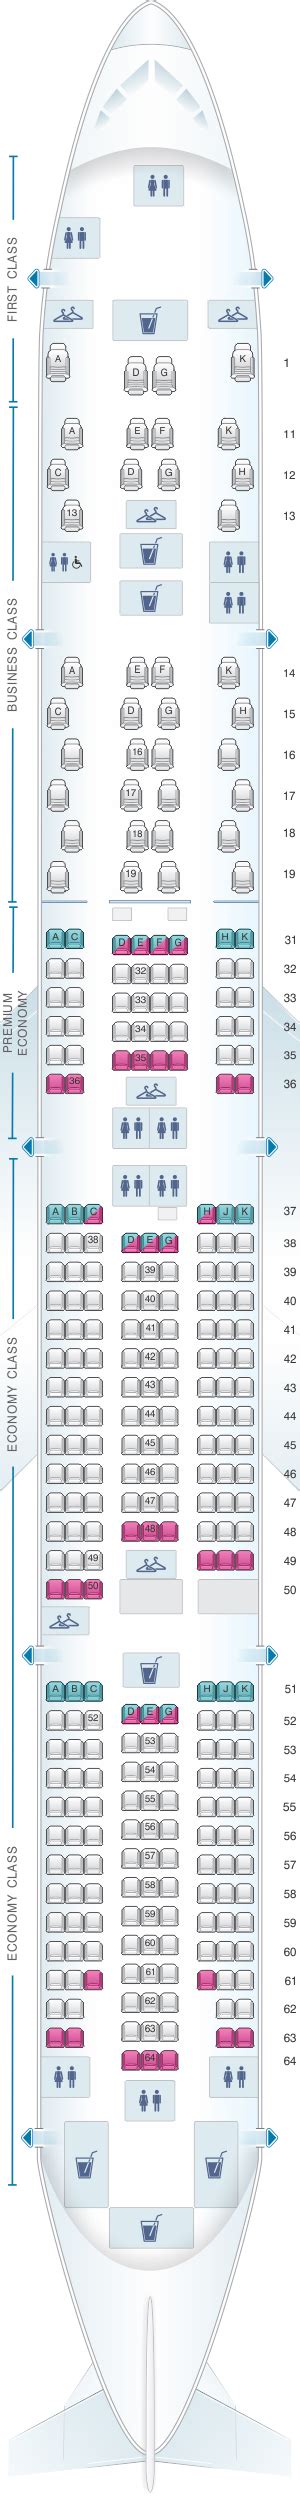 Seat Map China Southern Airlines Boeing B777 300er Seatmaestro